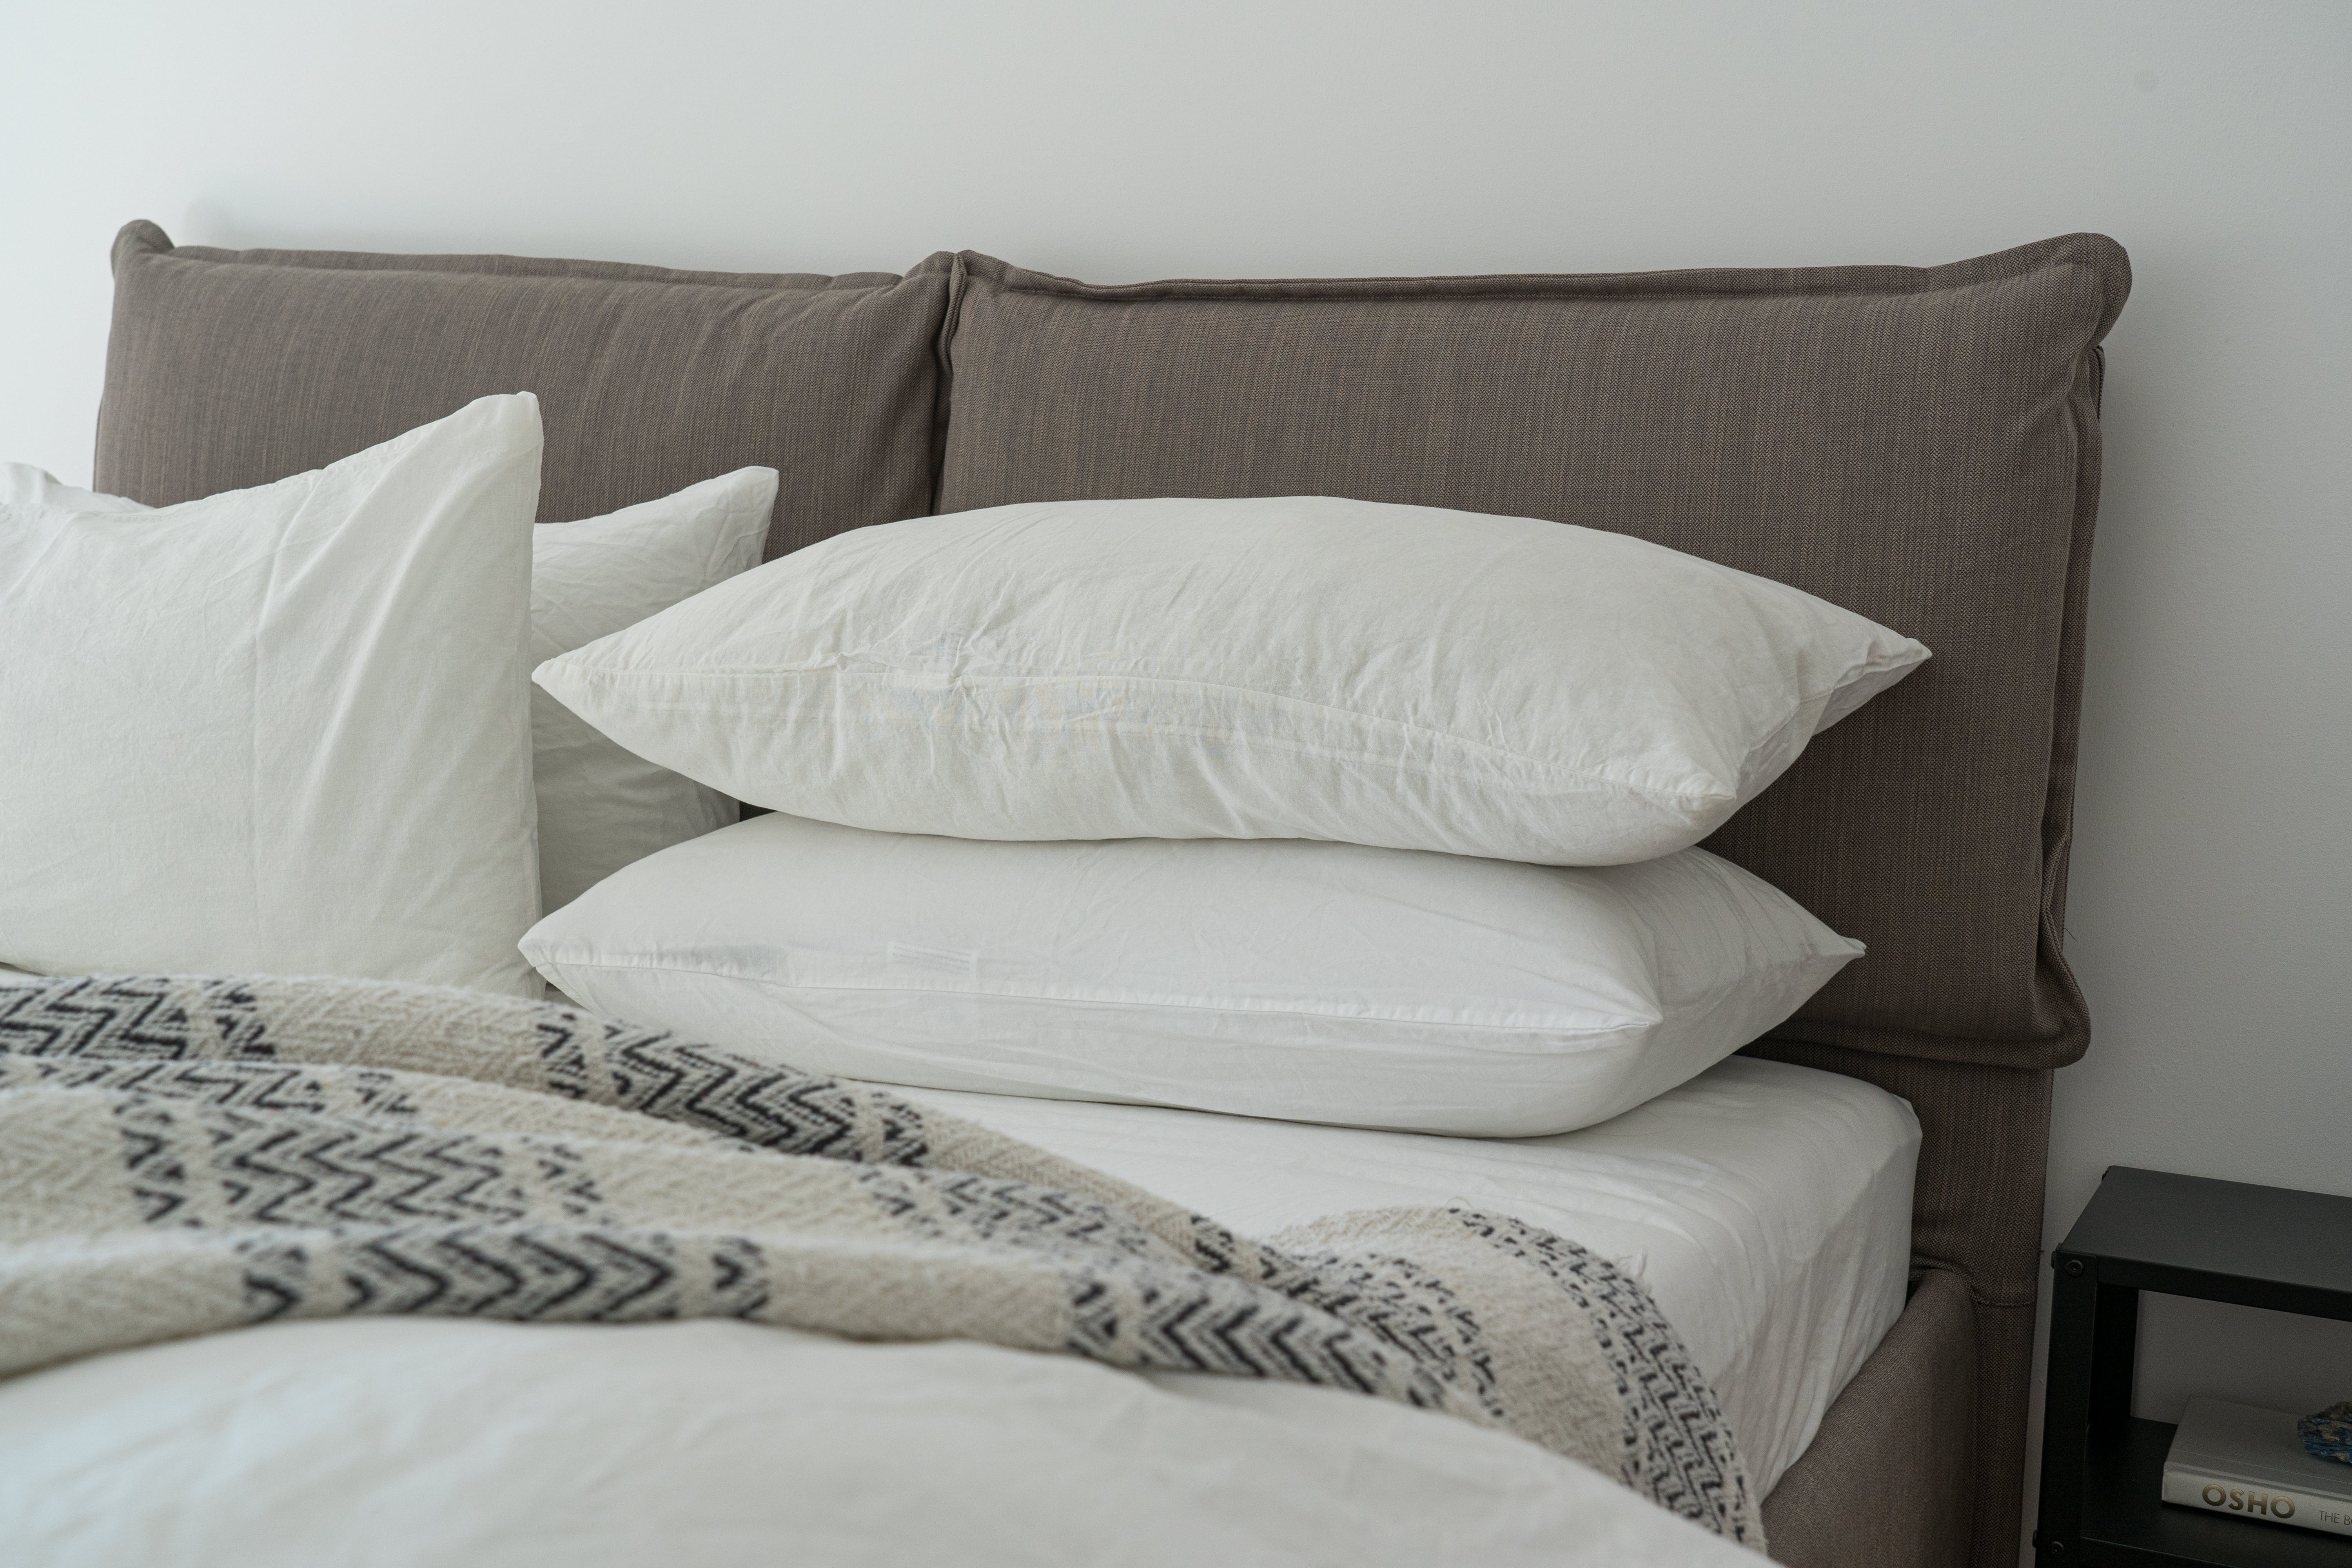 A mattress with pillows and a blanket | Source: Pexels